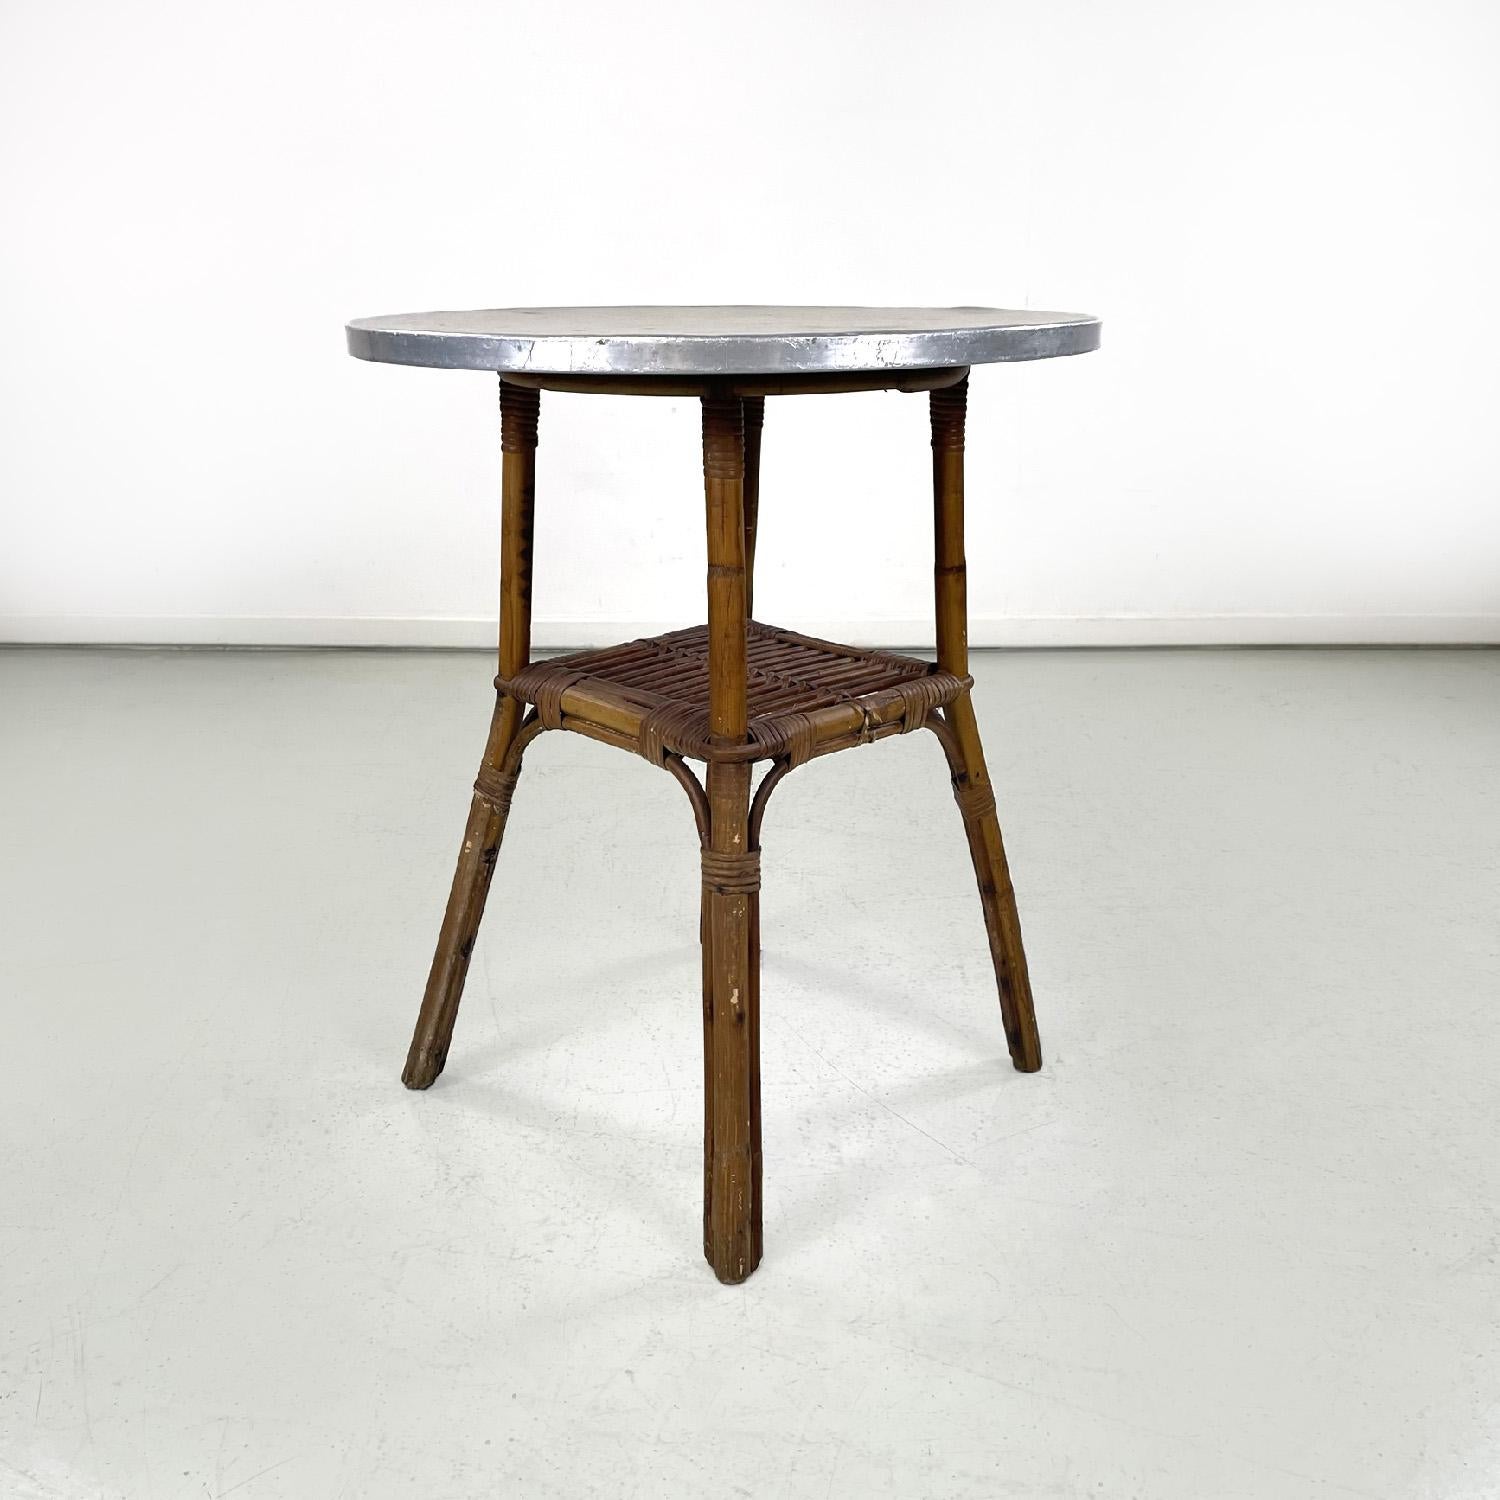 Italian mid-century modern coffee tables in bamboo and aluminum, 1960s
Set of three round coffee tables. The round top is made of aluminium, the structure is made of finely woven bamboo and comprises a top in the central part and the four legs.